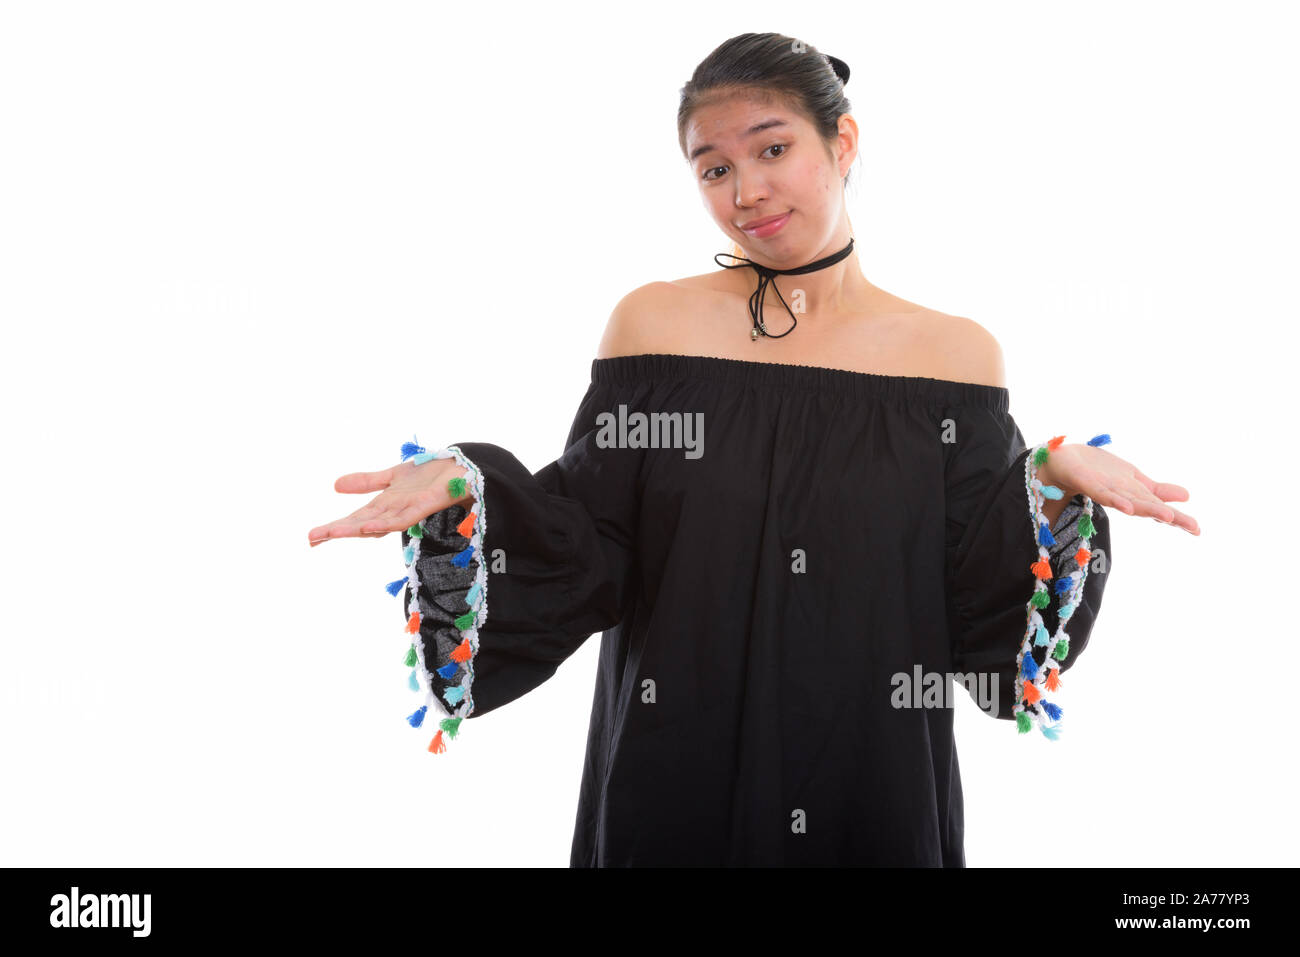 Studio shot of young Asian woman against white background Banque D'Images